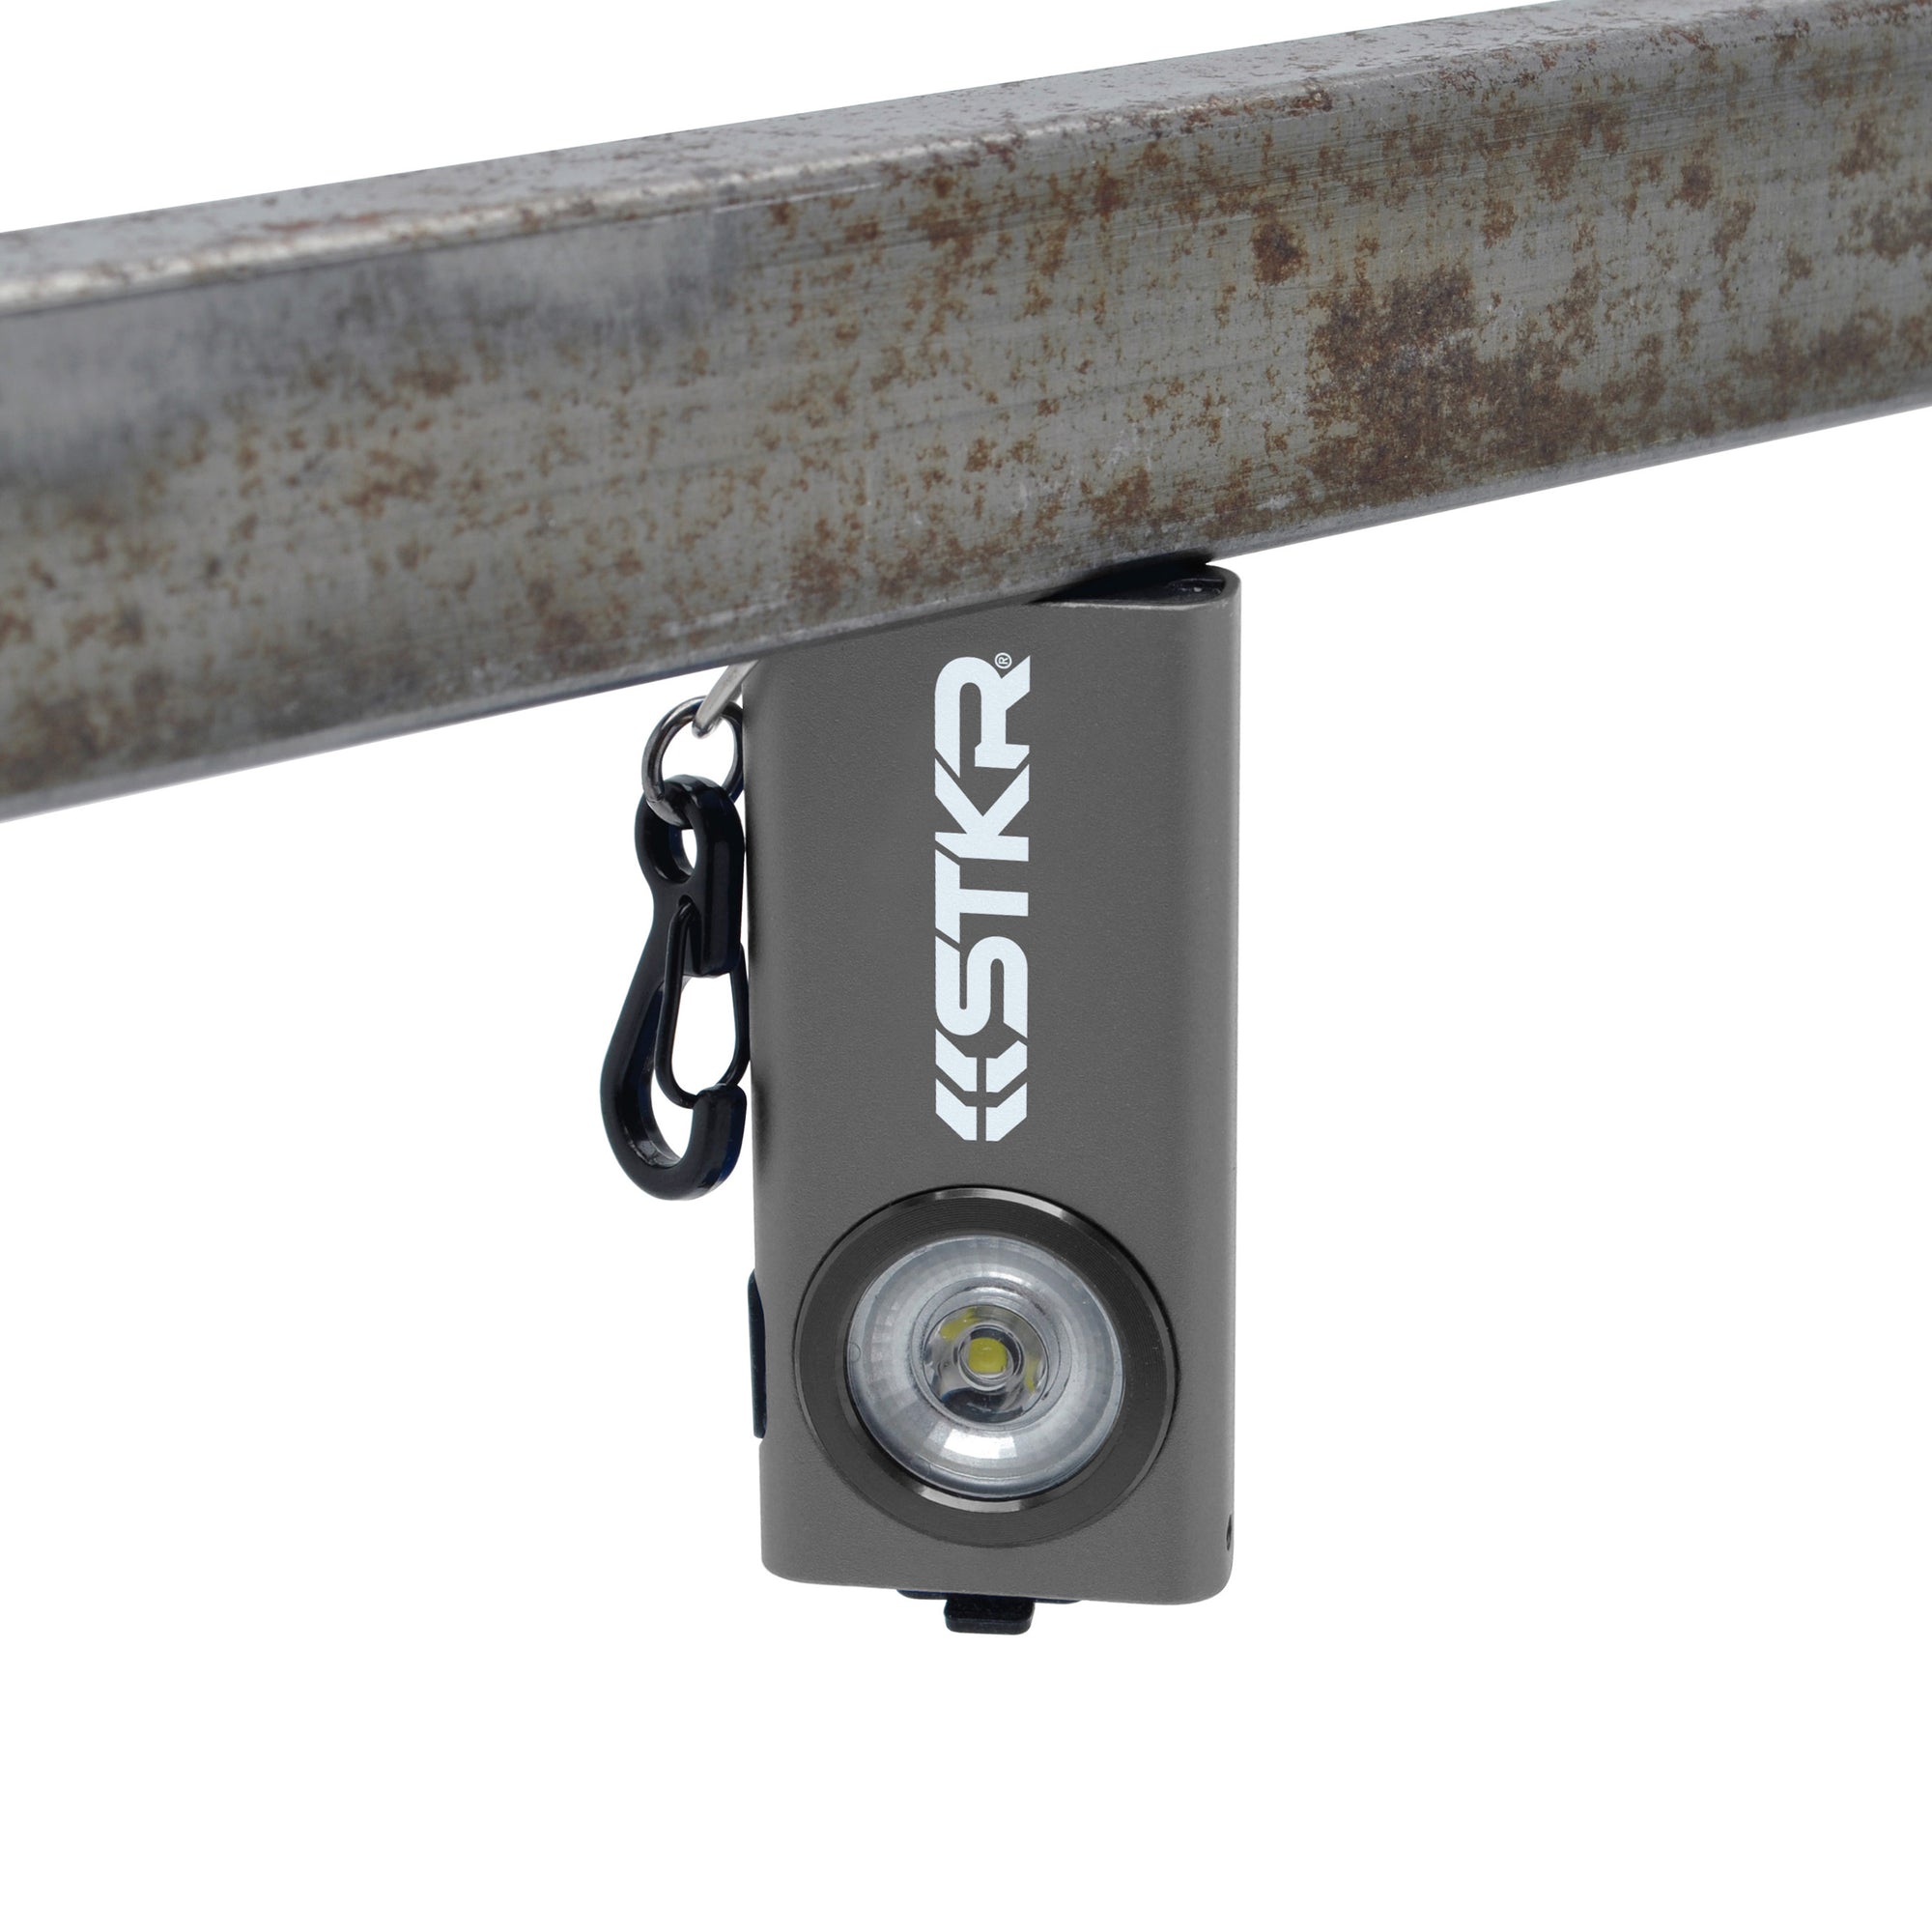 SlimJimmy Ultra-Bright Keychain Light - Grey - attached upside down onto a piece of metal